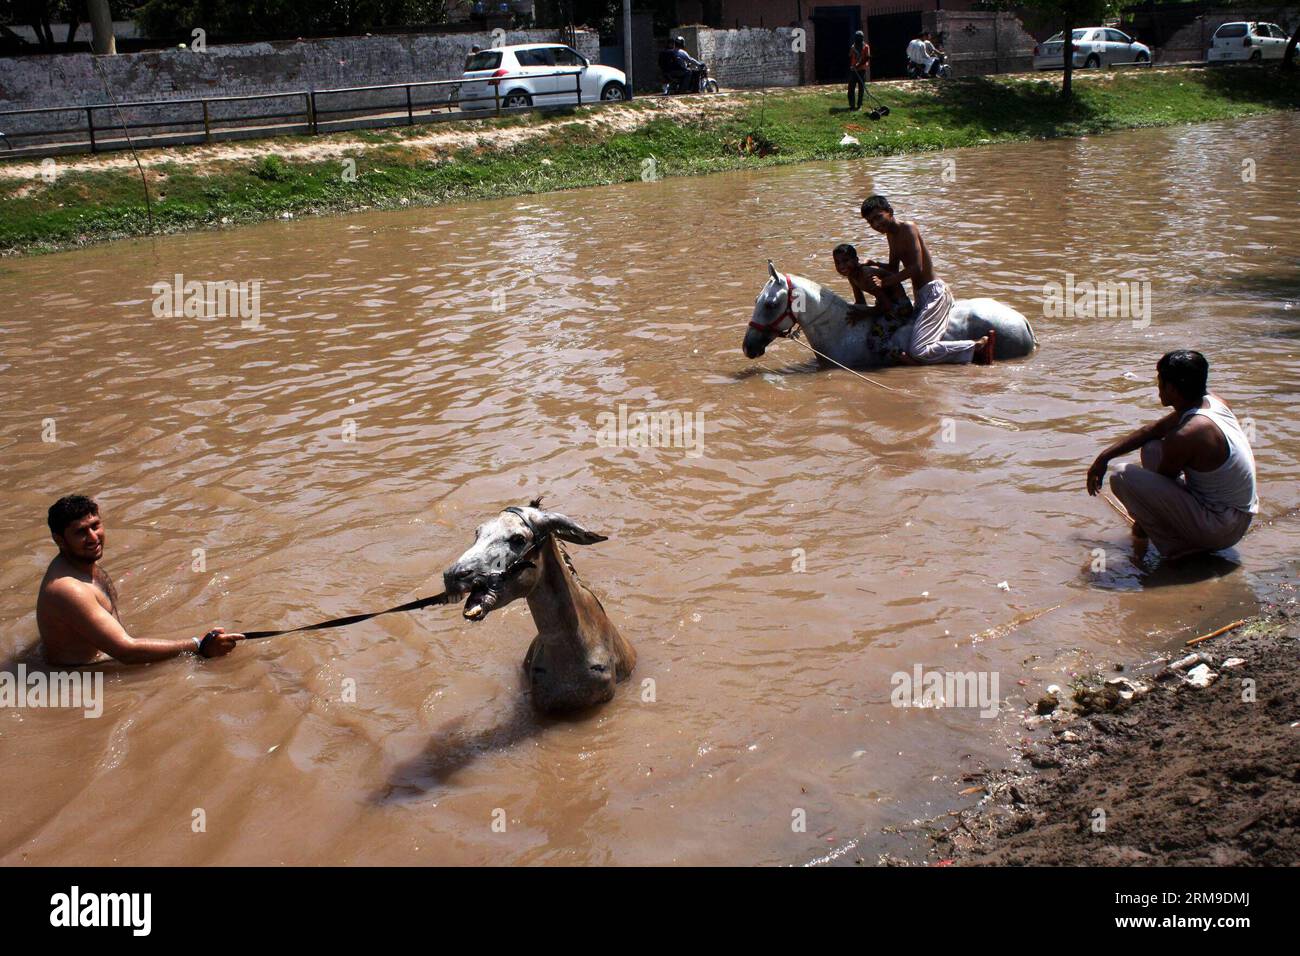 LAHORE, May 19, 2014 (Xinhua) -- People wade with their animals in a canal during a hot day in eastern Pakistan s Lahore on May 19, 2014. Temperature reached over 40 degrees Celsius in many parts of the country. (Xinhua/Jamil Ahmed) (zjy) PAKISTAN-LAHORE-HEAT PUBLICATIONxNOTxINxCHN   Lahore May 19 2014 XINHUA Celebrities Calf With their Animals in a Canal during a Hot Day in Eastern Pakistan S Lahore ON May 19 2014 temperature reached Over 40 Degrees Celsius in MANY Parts of The Country XINHUA Jamil Ahmed  Pakistan Lahore Heat PUBLICATIONxNOTxINxCHN Stock Photo